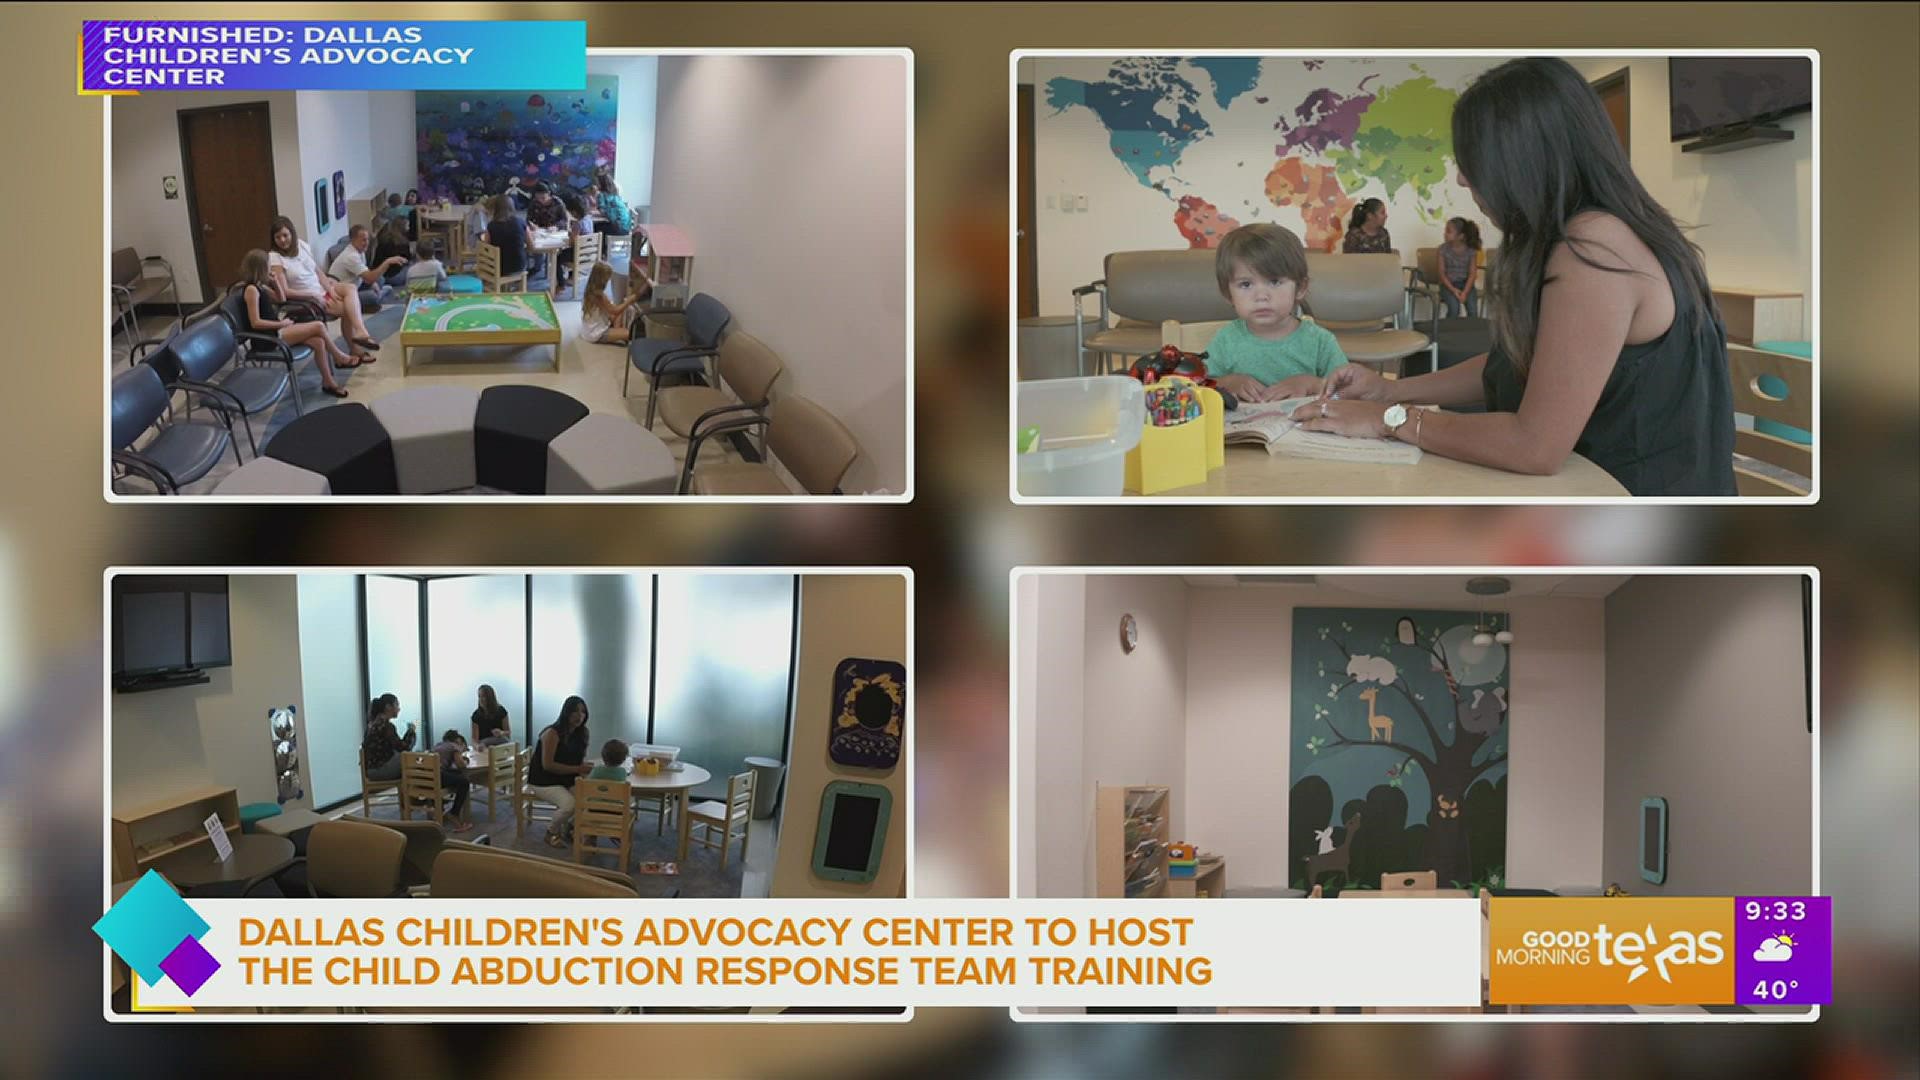 Dallas Children's Advocacy Center is hosting the CART Training where they will educate on the best defenses against those who seek to harm children.